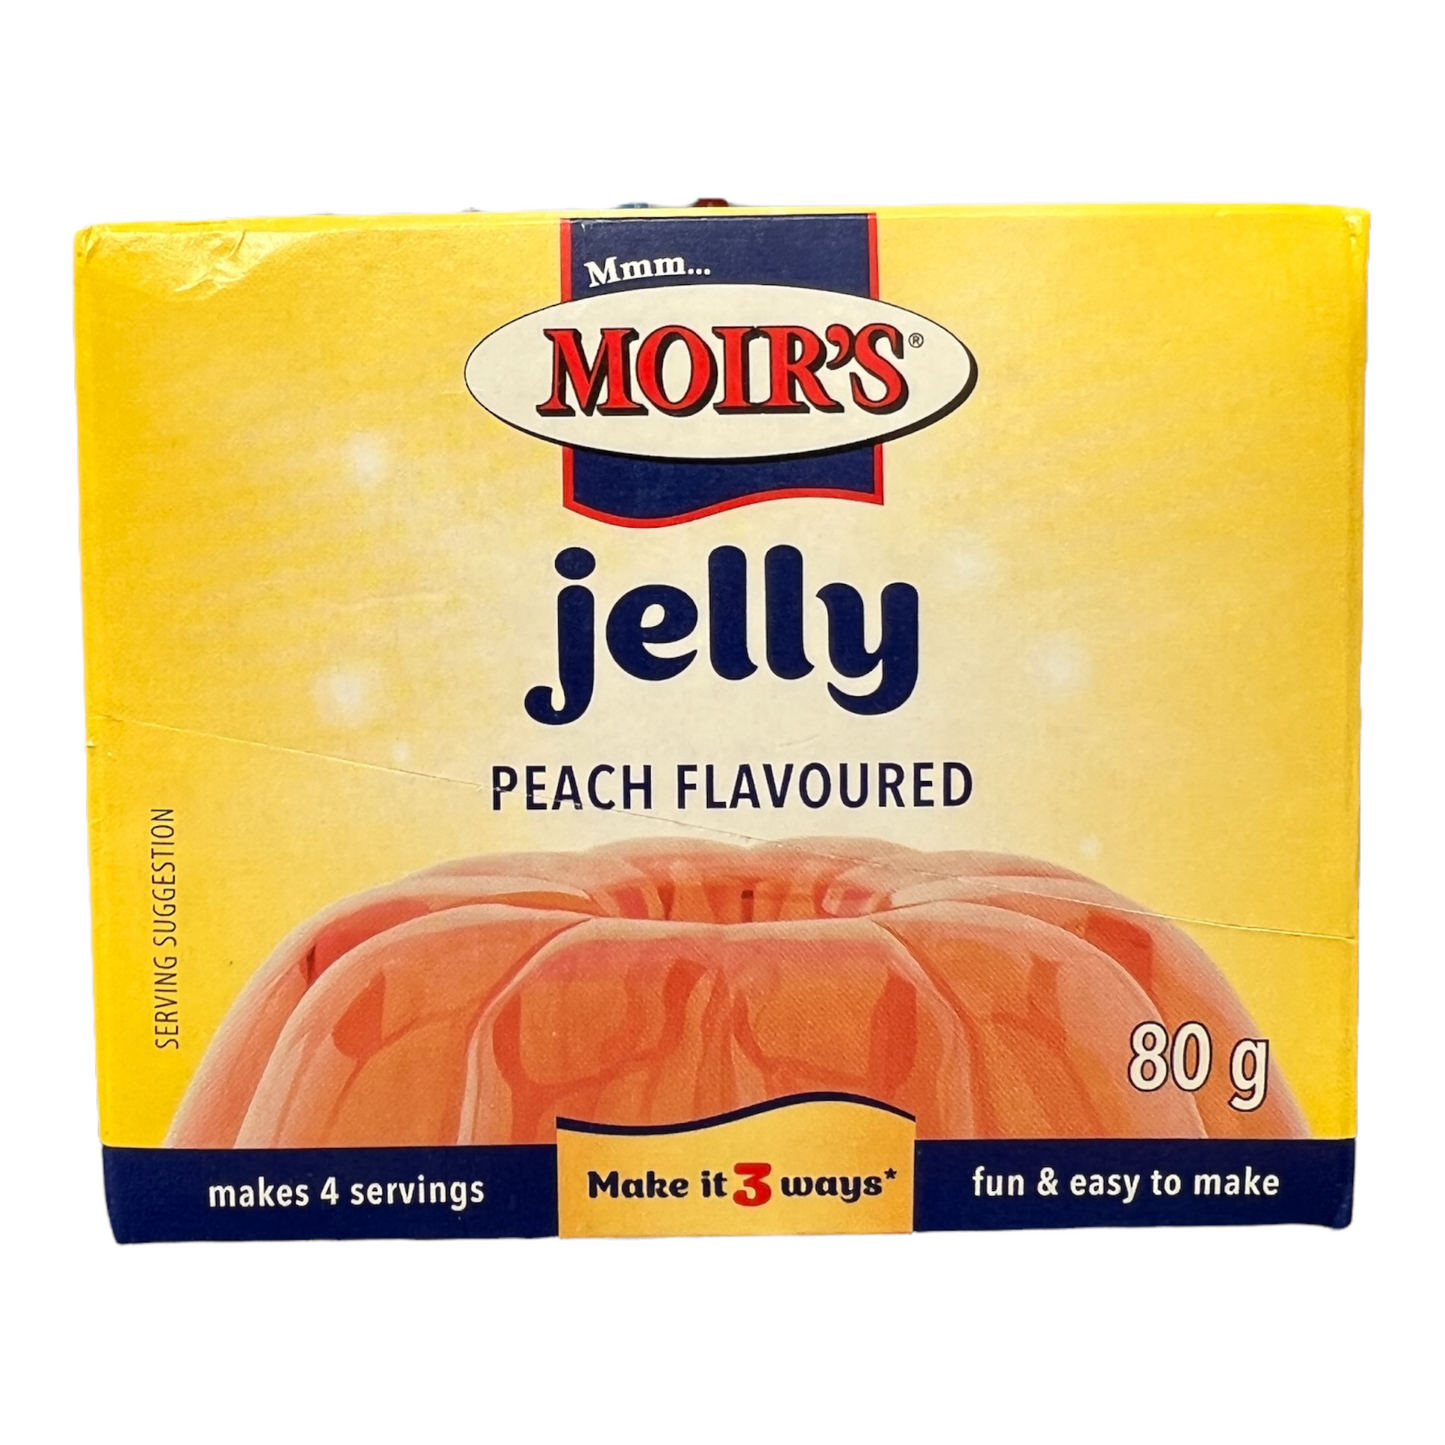 Moir's Peach Flavoured Jelly 80g [South African]